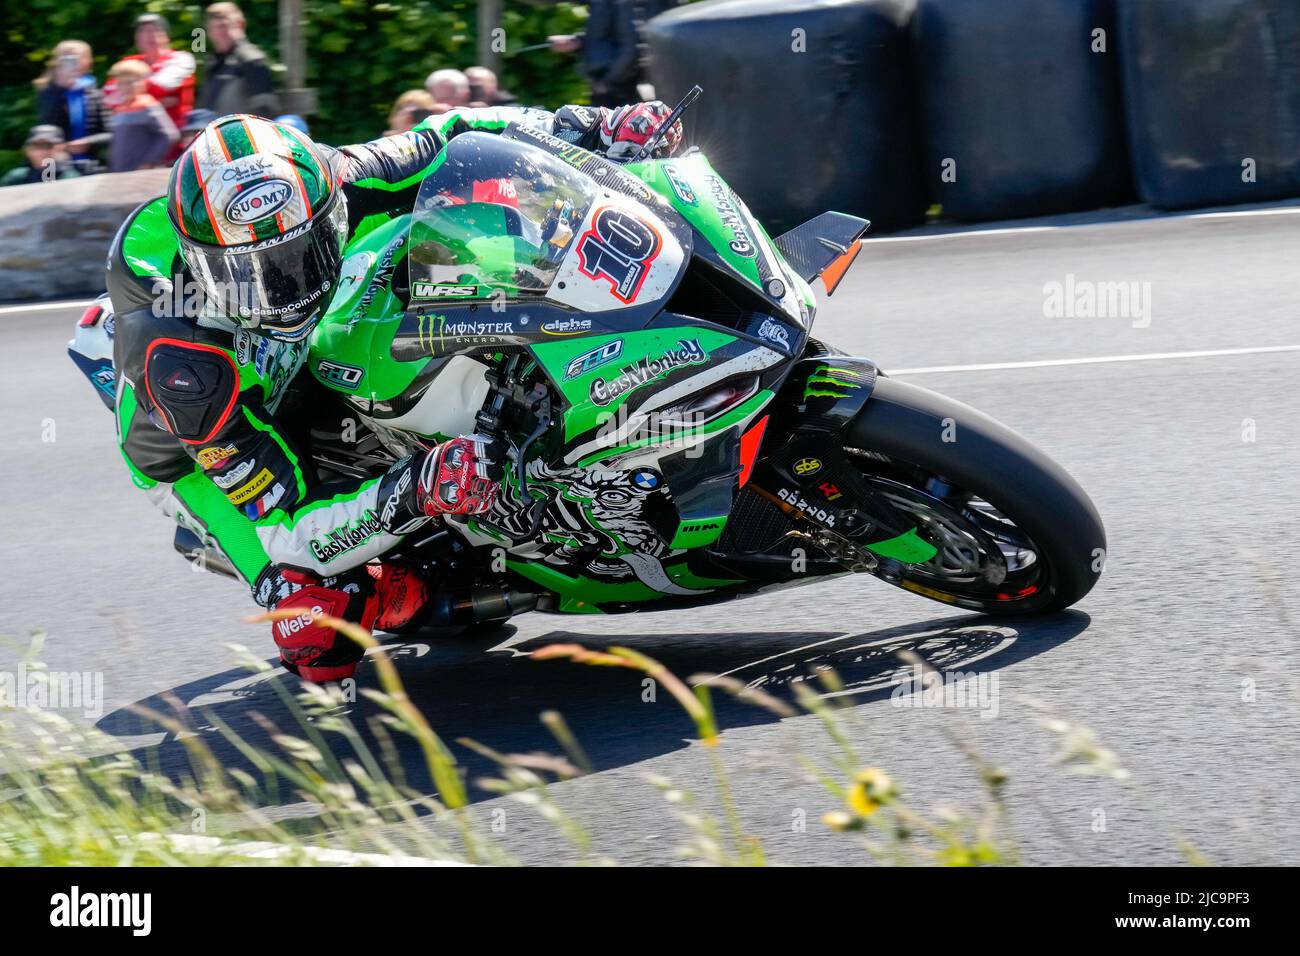 Douglas, Isle Of Man. 11th June, 2022. Peter Hickman (1000 BMW) representing the Gas Monkey Garage by FHO Racing team on his way to winning the 2022 Milwaukee Senior TT at the Isle of Man, Douglas, Isle of Man on the 11 June 2022. Photo by David Horn. Credit: PRiME Media Images/Alamy Live News Stock Photo